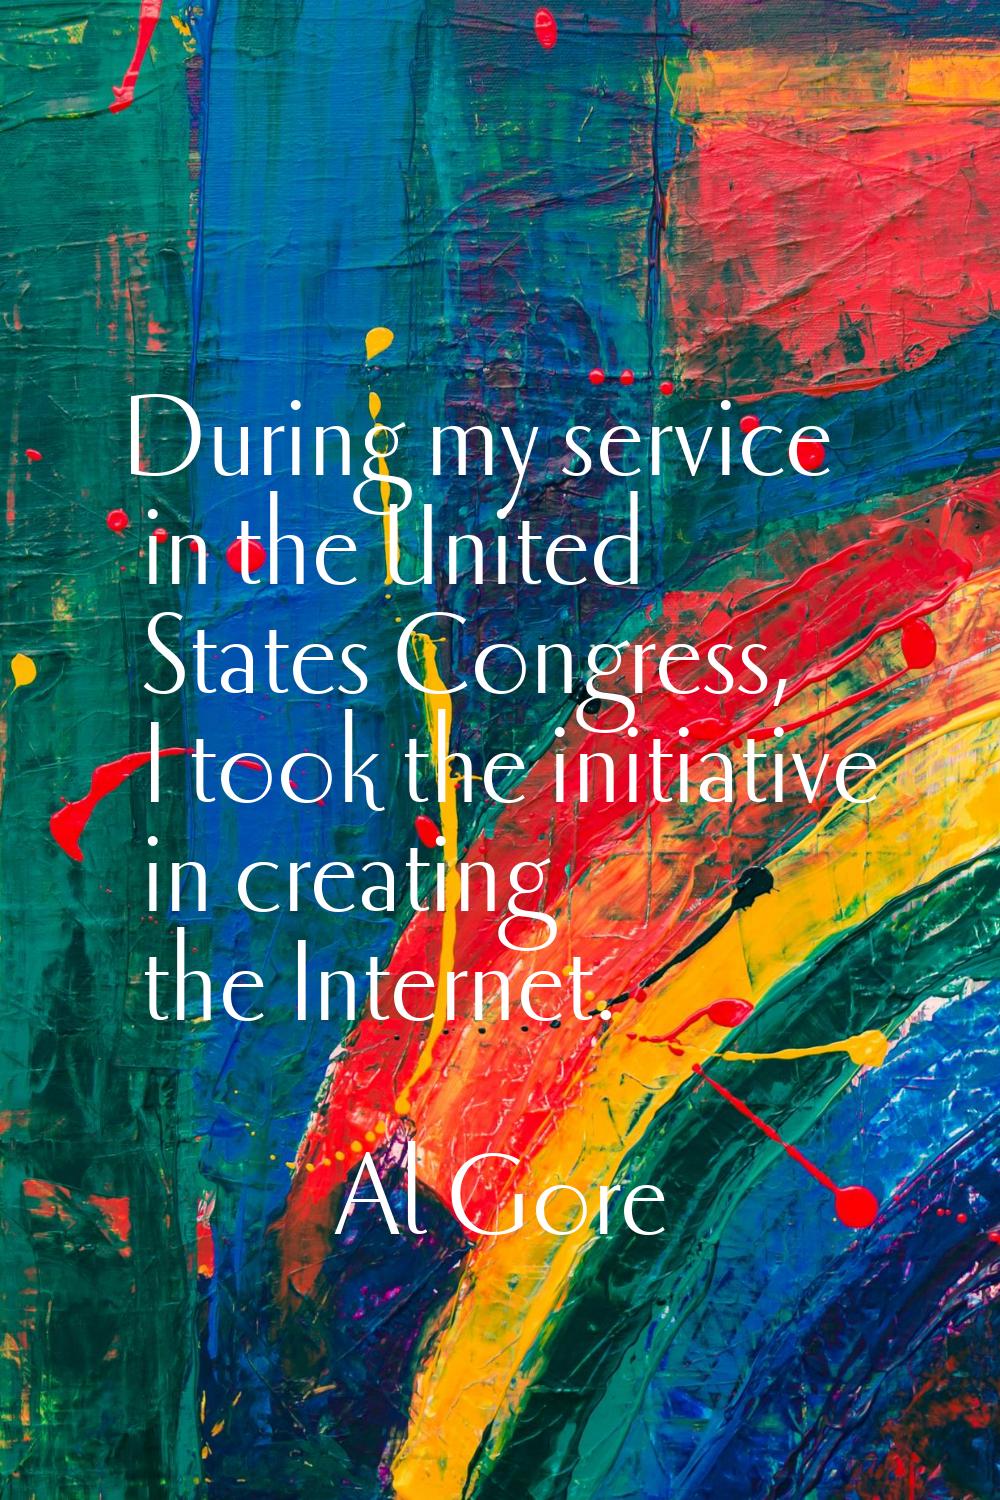 During my service in the United States Congress, I took the initiative in creating the Internet.